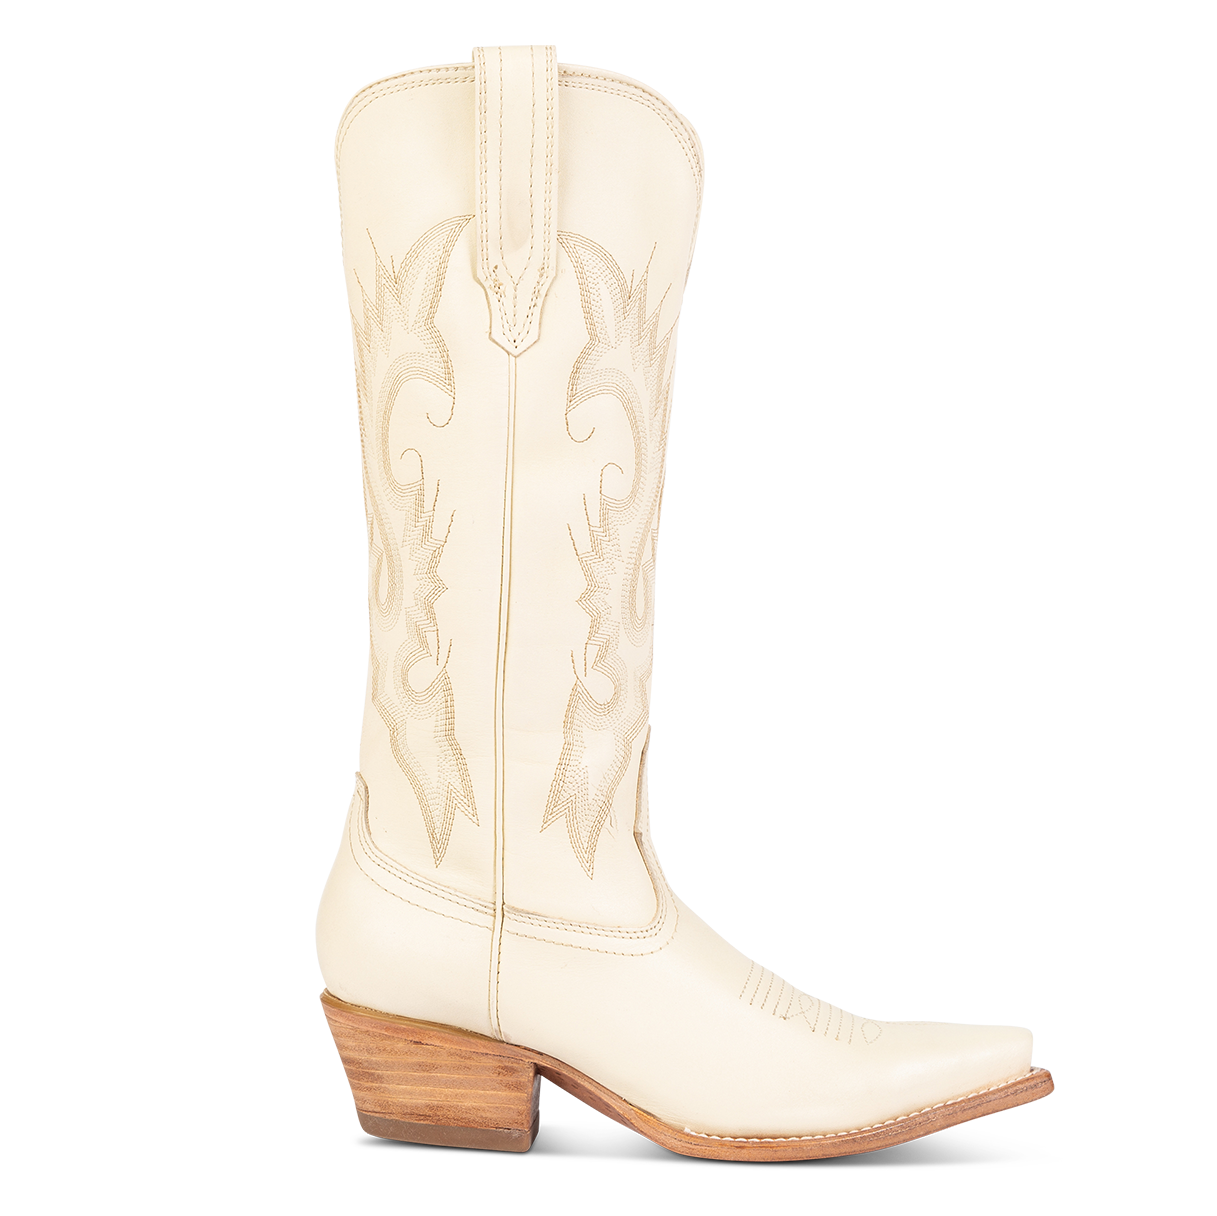 FREEBIRD women's Woodland beige leather cowboy boot with stitch detailing and snip toe construction